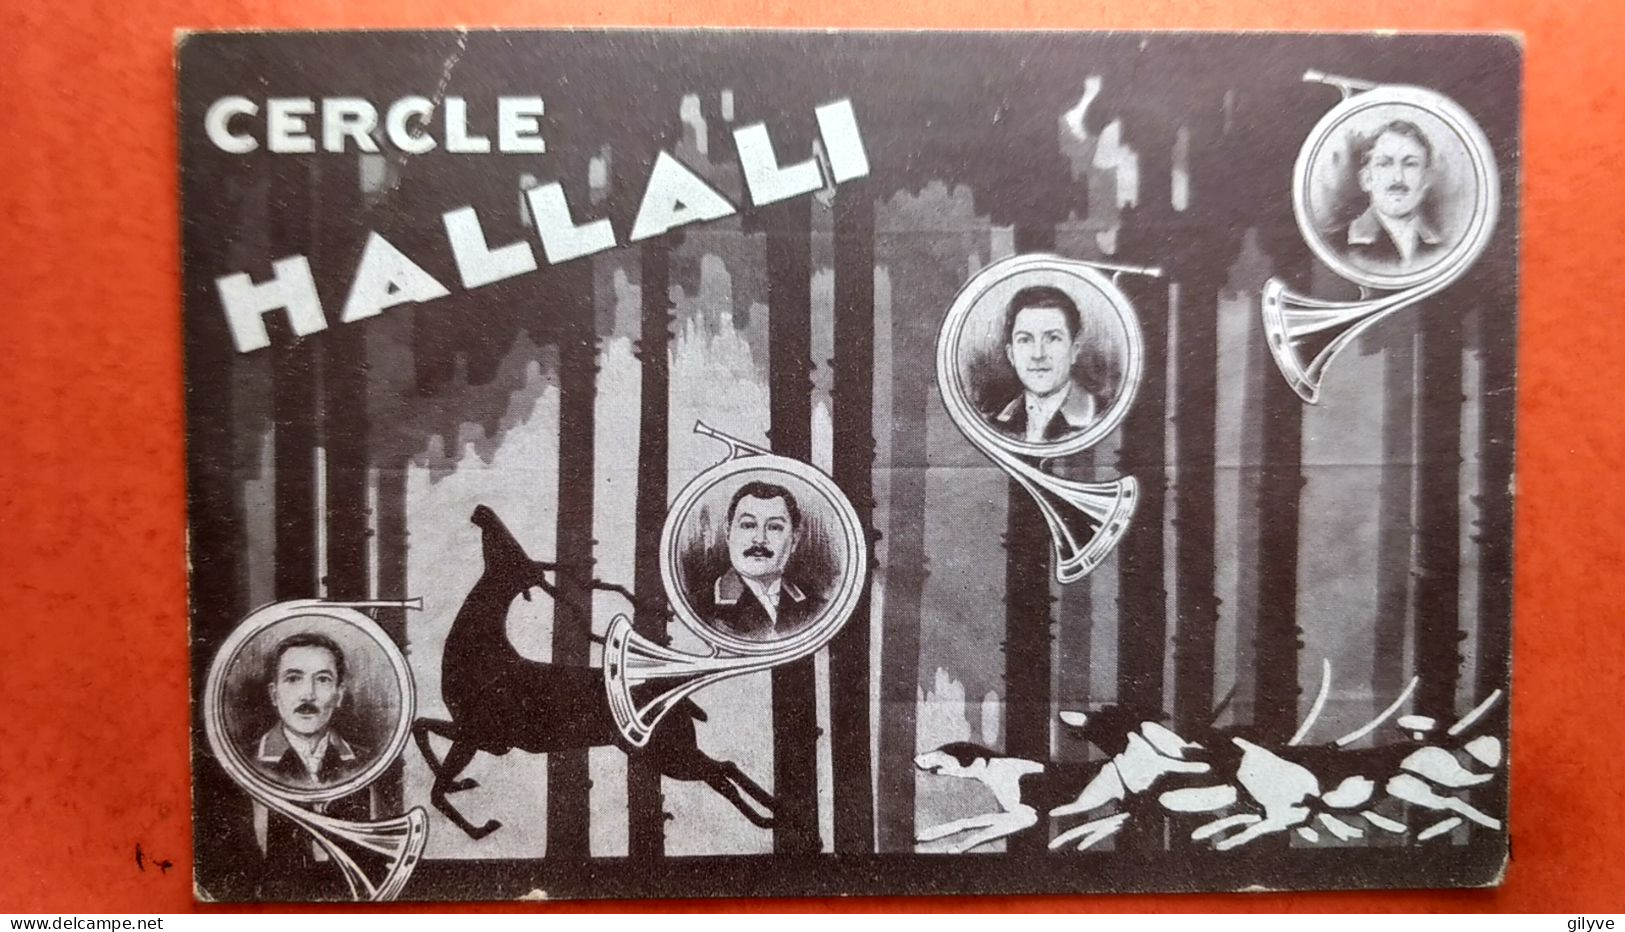 CPA.  Cercle HALLALI .   (AF.220) - Chasse